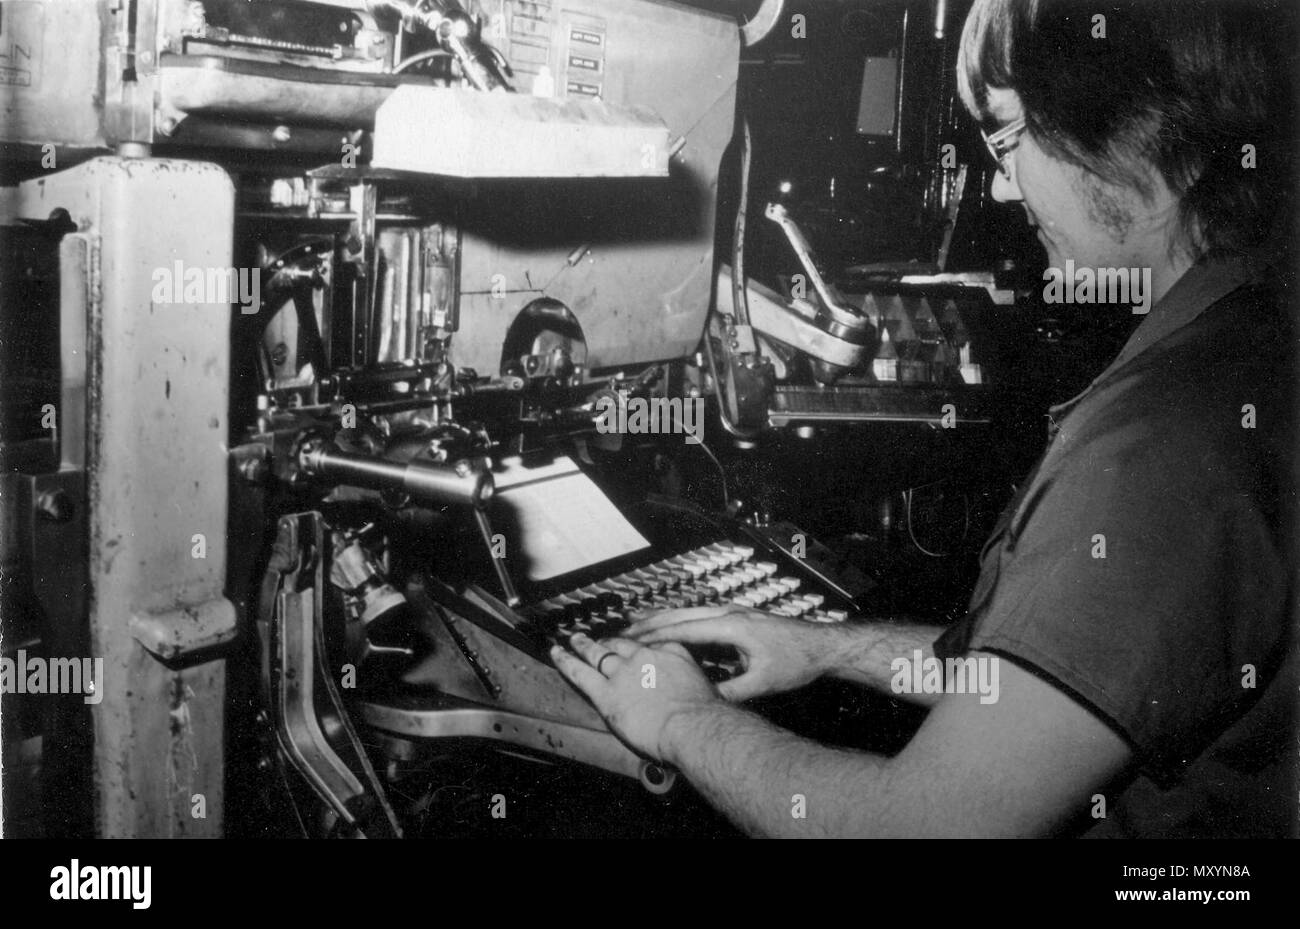 Apprentice linotype operator at Queensland Times, Ipswich, 1975. Linotype typesetting machine by which characters are cast in type metal as a compete line rather than as individual characters as on the Monotype typesetting machine. It was patented in the United States in 1884 by Ottmar Mergenthaler. Linotype, which has now largely been supplanted by photocomposition, was most often used when large amounts of straight text matter were to be set.  In the Linotype system, the operator selects a magazine containing brass matrices to mold an enti Stock Photo